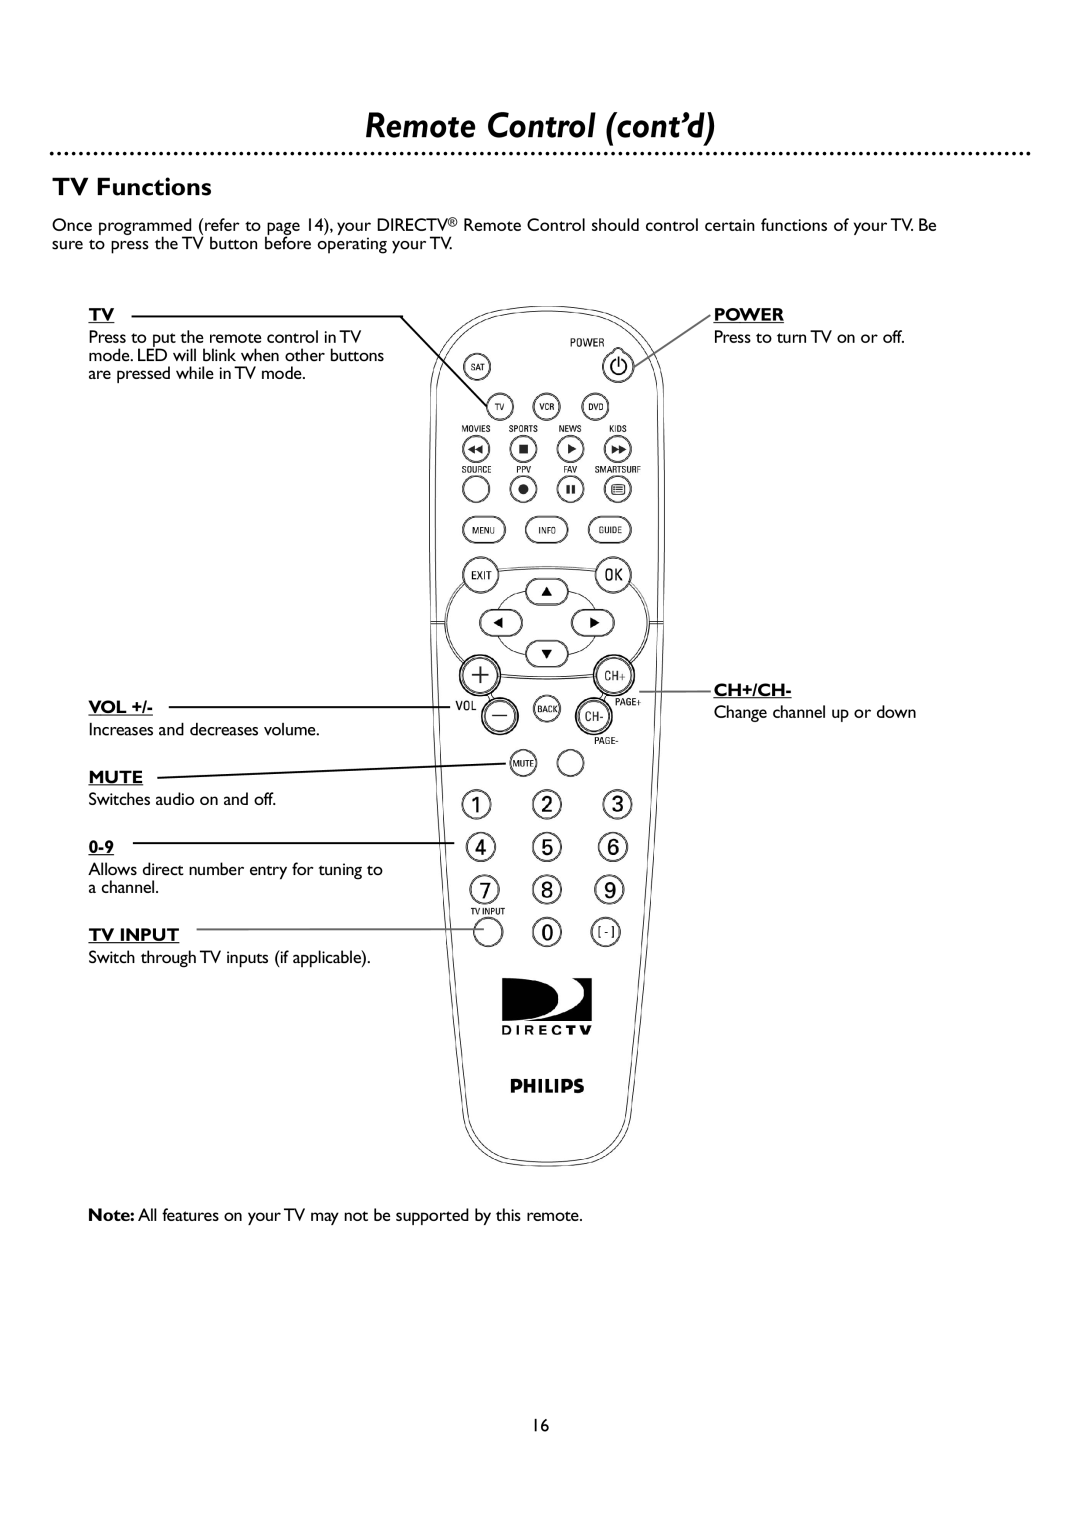 DirecTV DSR 660 manual TV Functions, Vol +, Mute, Tv Input, Ch+/Ch, Remote Control cont’d, Power 